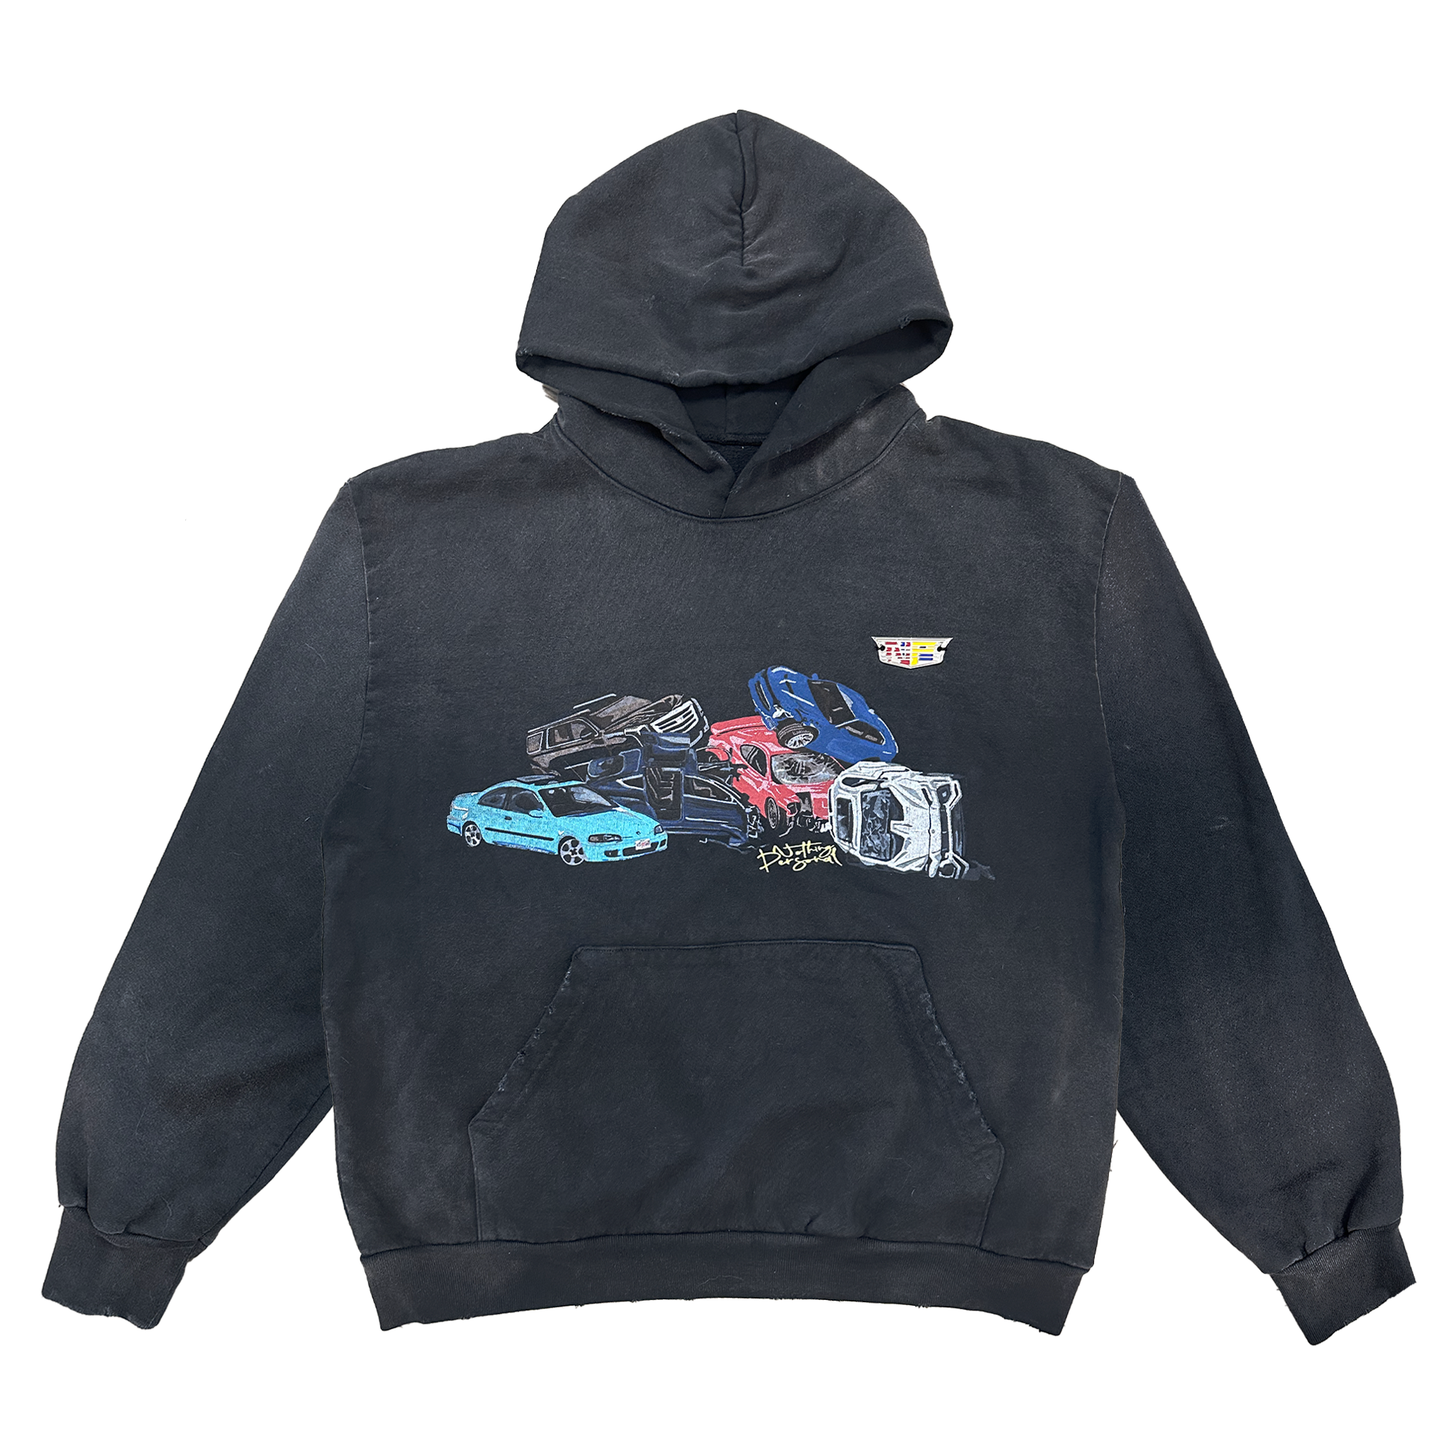 Reckless Driving Hoodie – The Nothing Personal